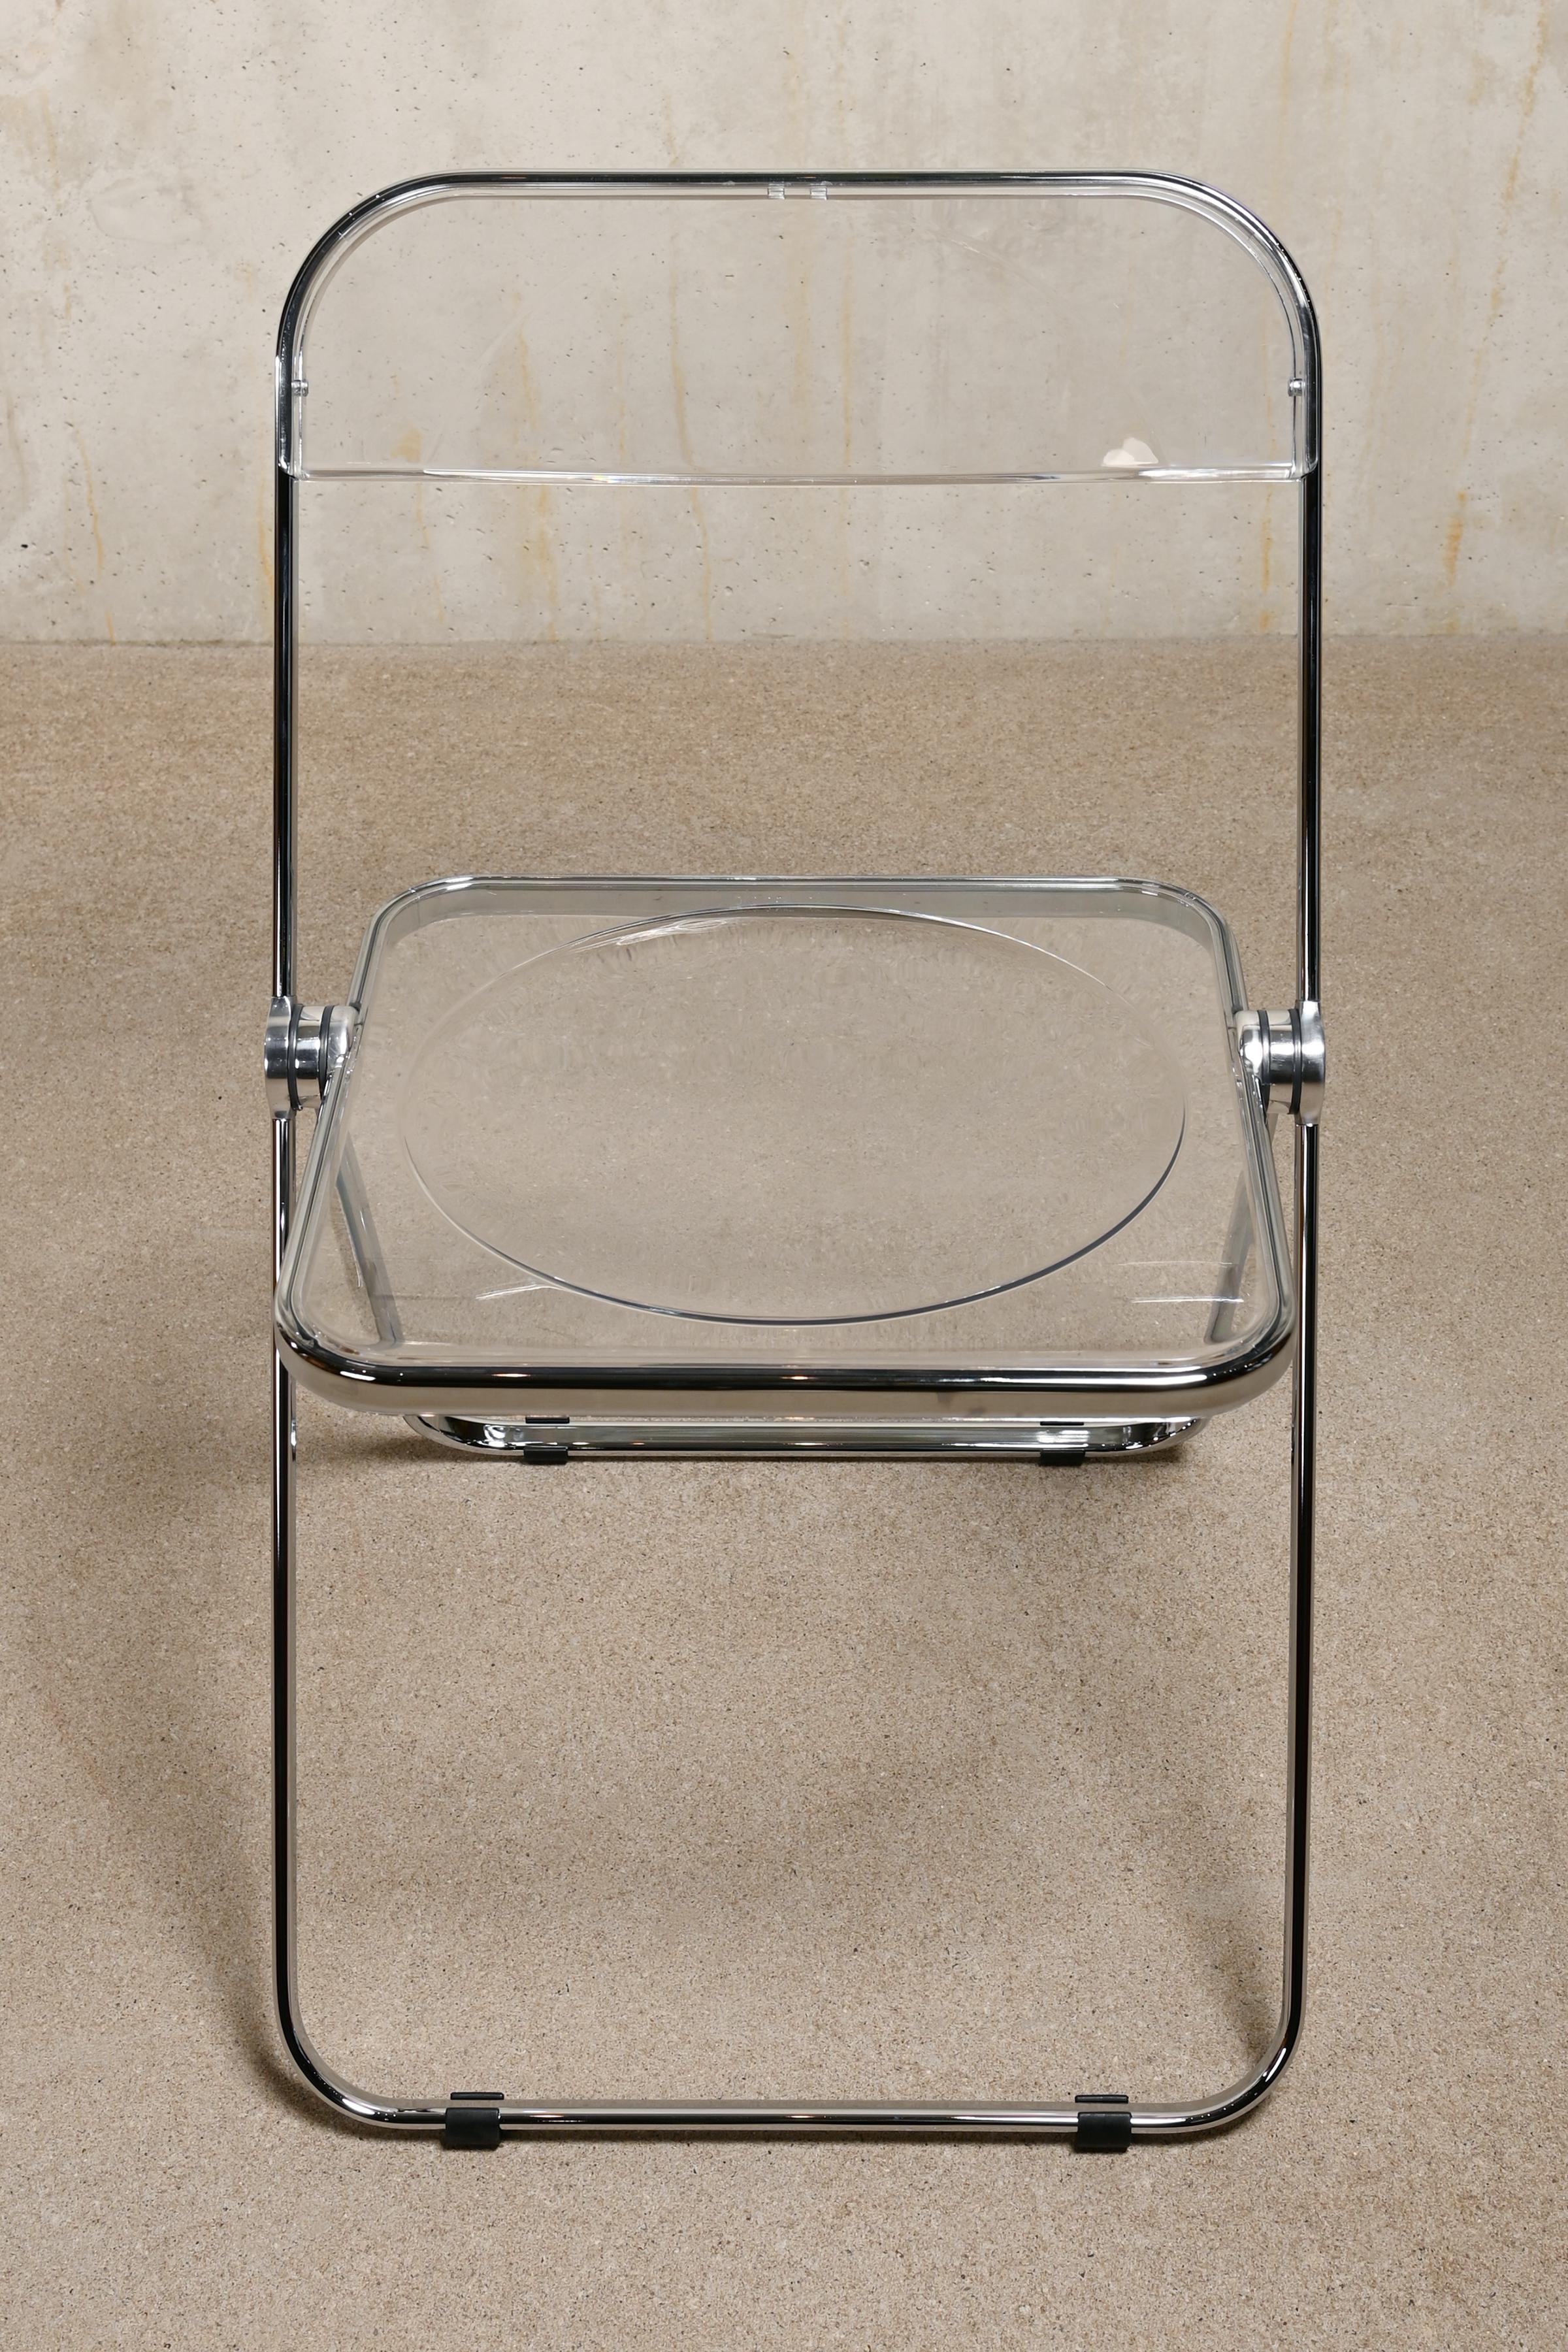 Steel Giancarlo Piretti Plia Folding Chair in Lucite and Chrome for Castelli, Italy For Sale